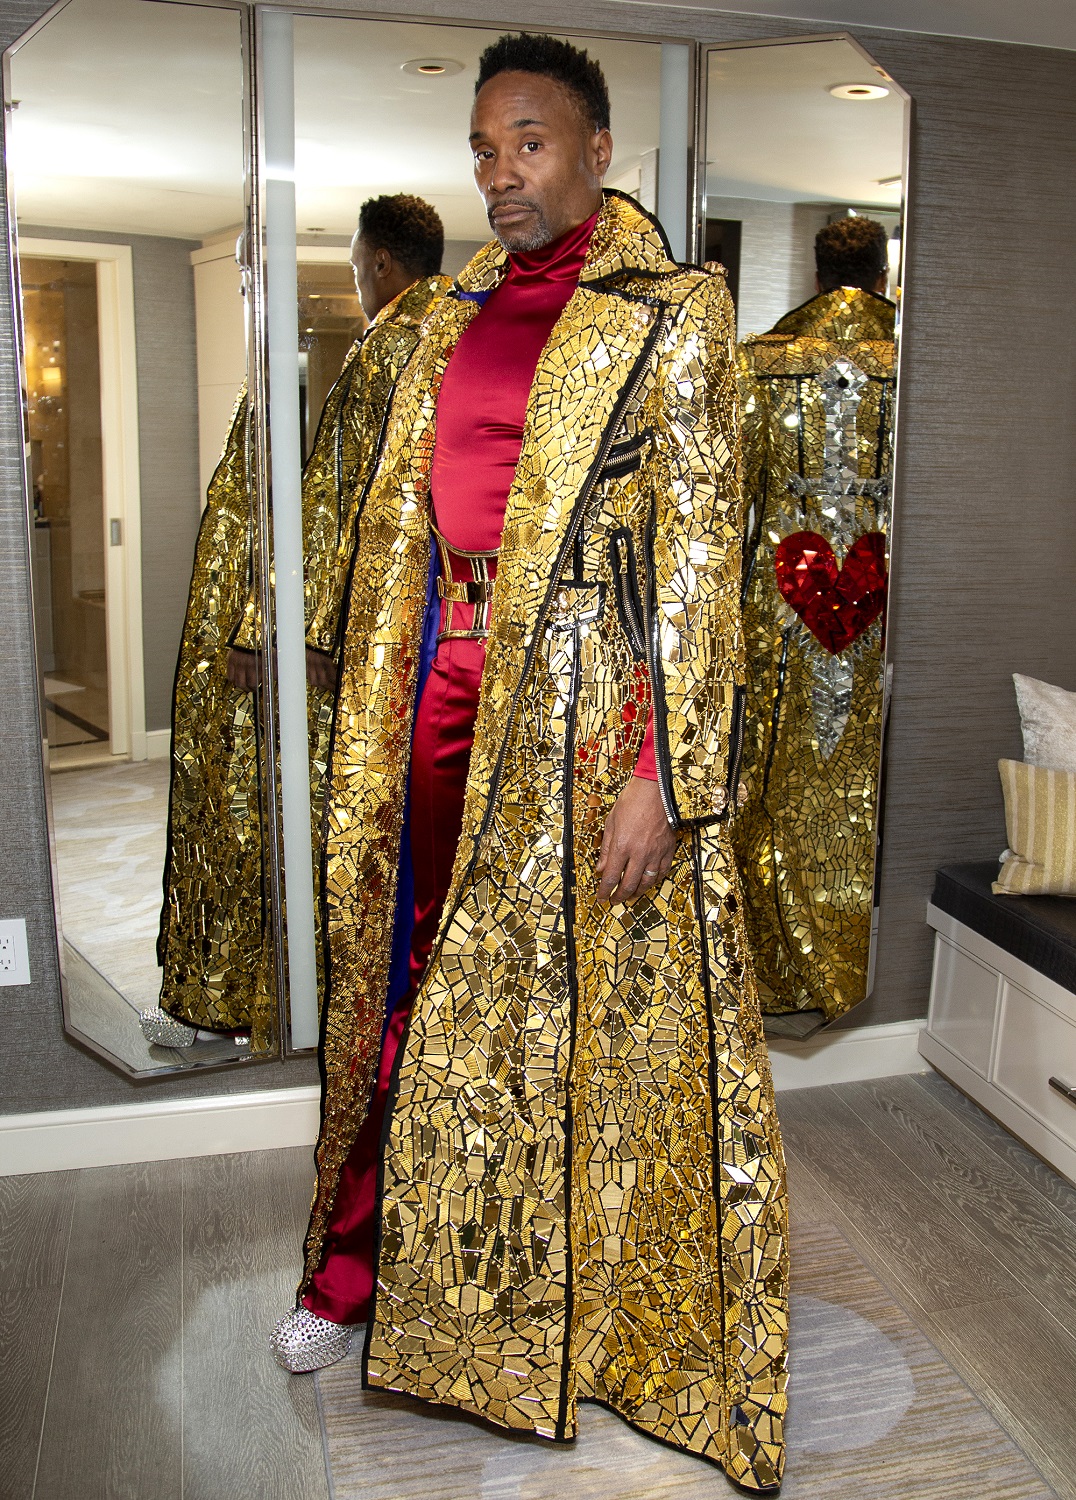 Billy Porter during his fitting for his the opening performance with Janelle Monae at the 92nd Academy Awards on February 9, 2020 in Los Angeles, California. 